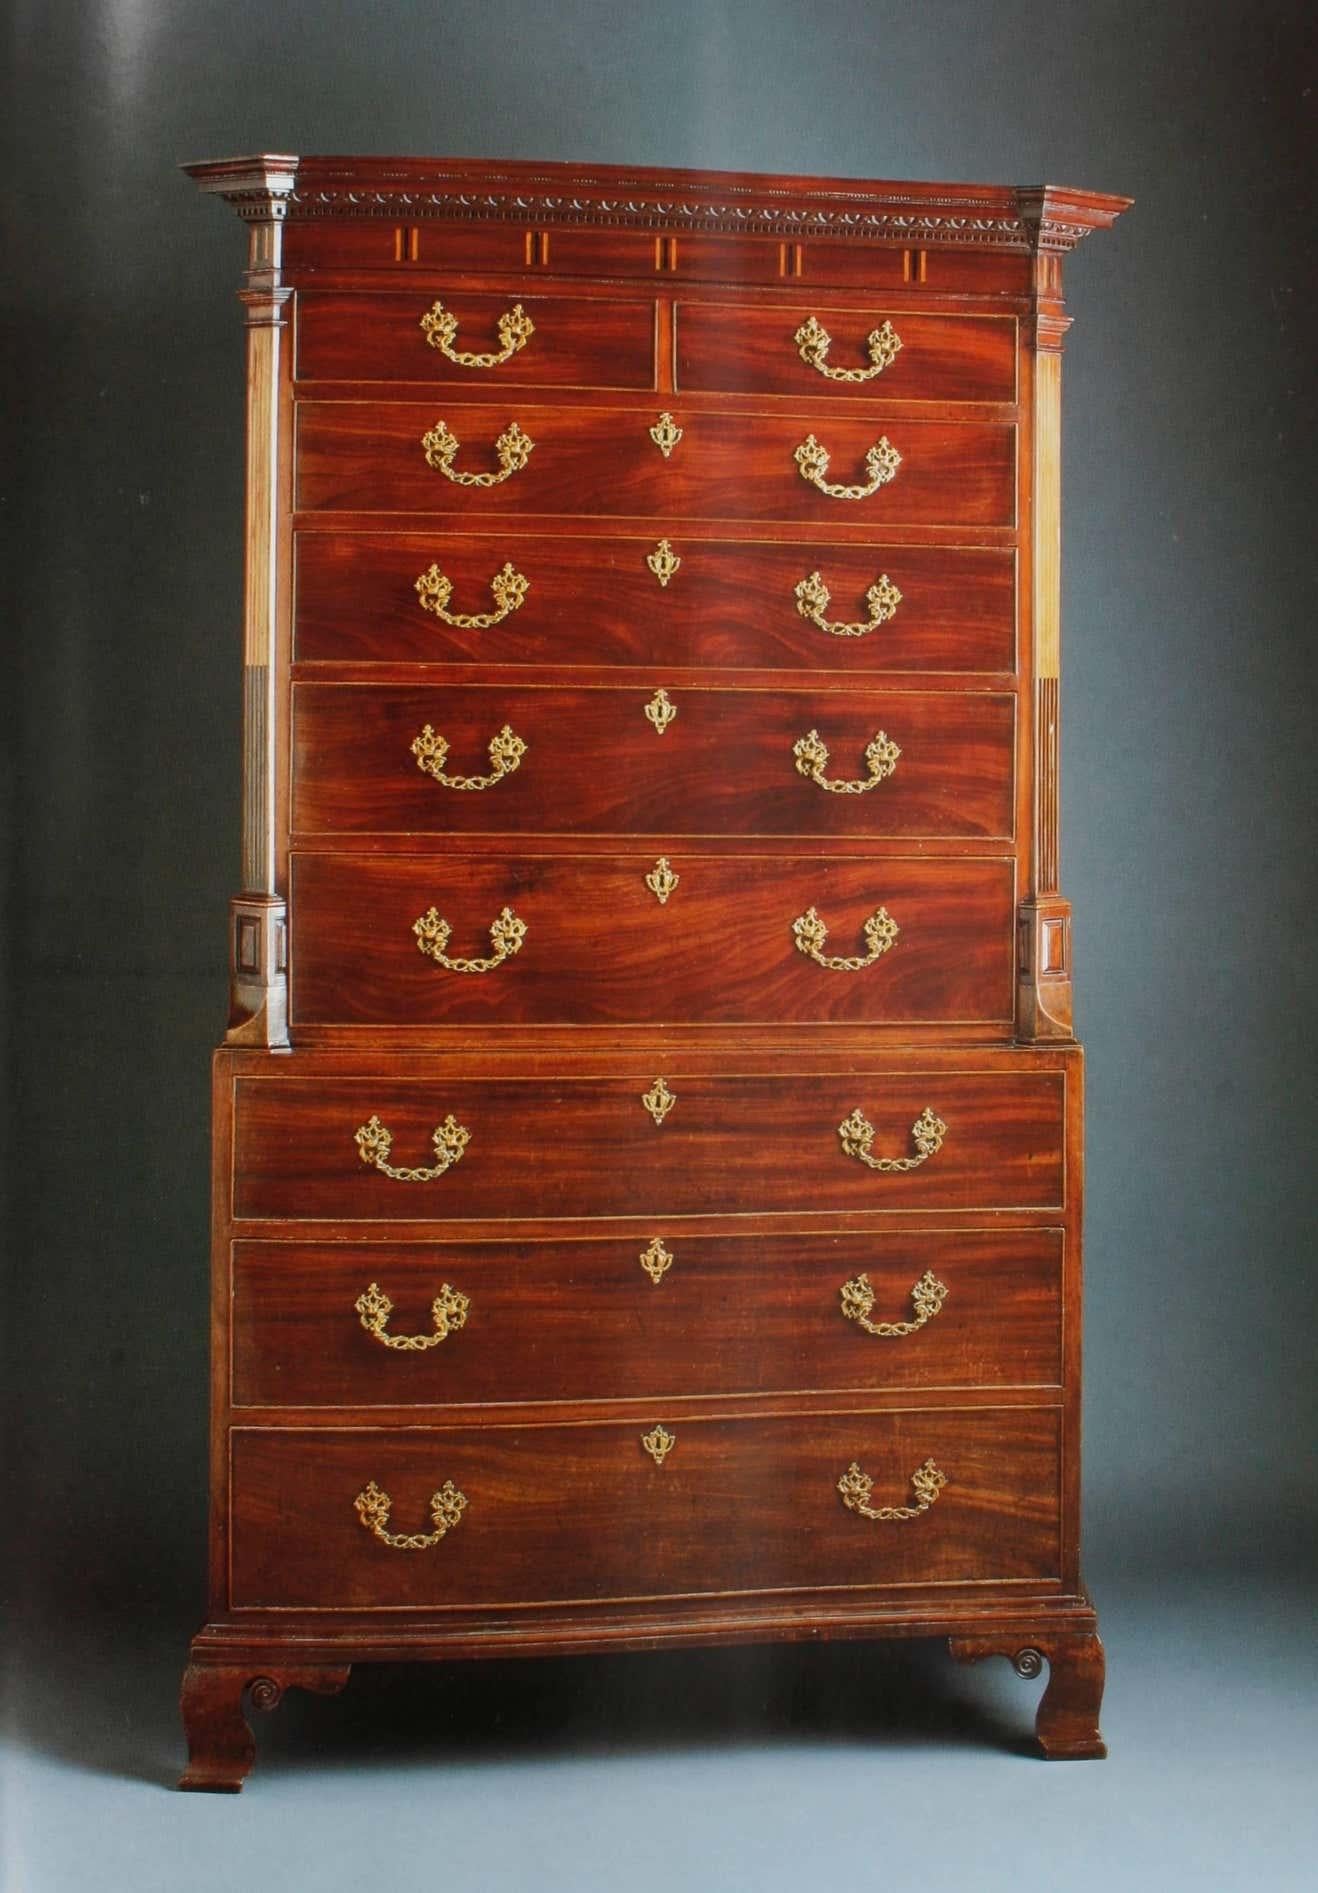 Paper Sotheby's, the Arthingworth Collection, Important English Furniture For Sale